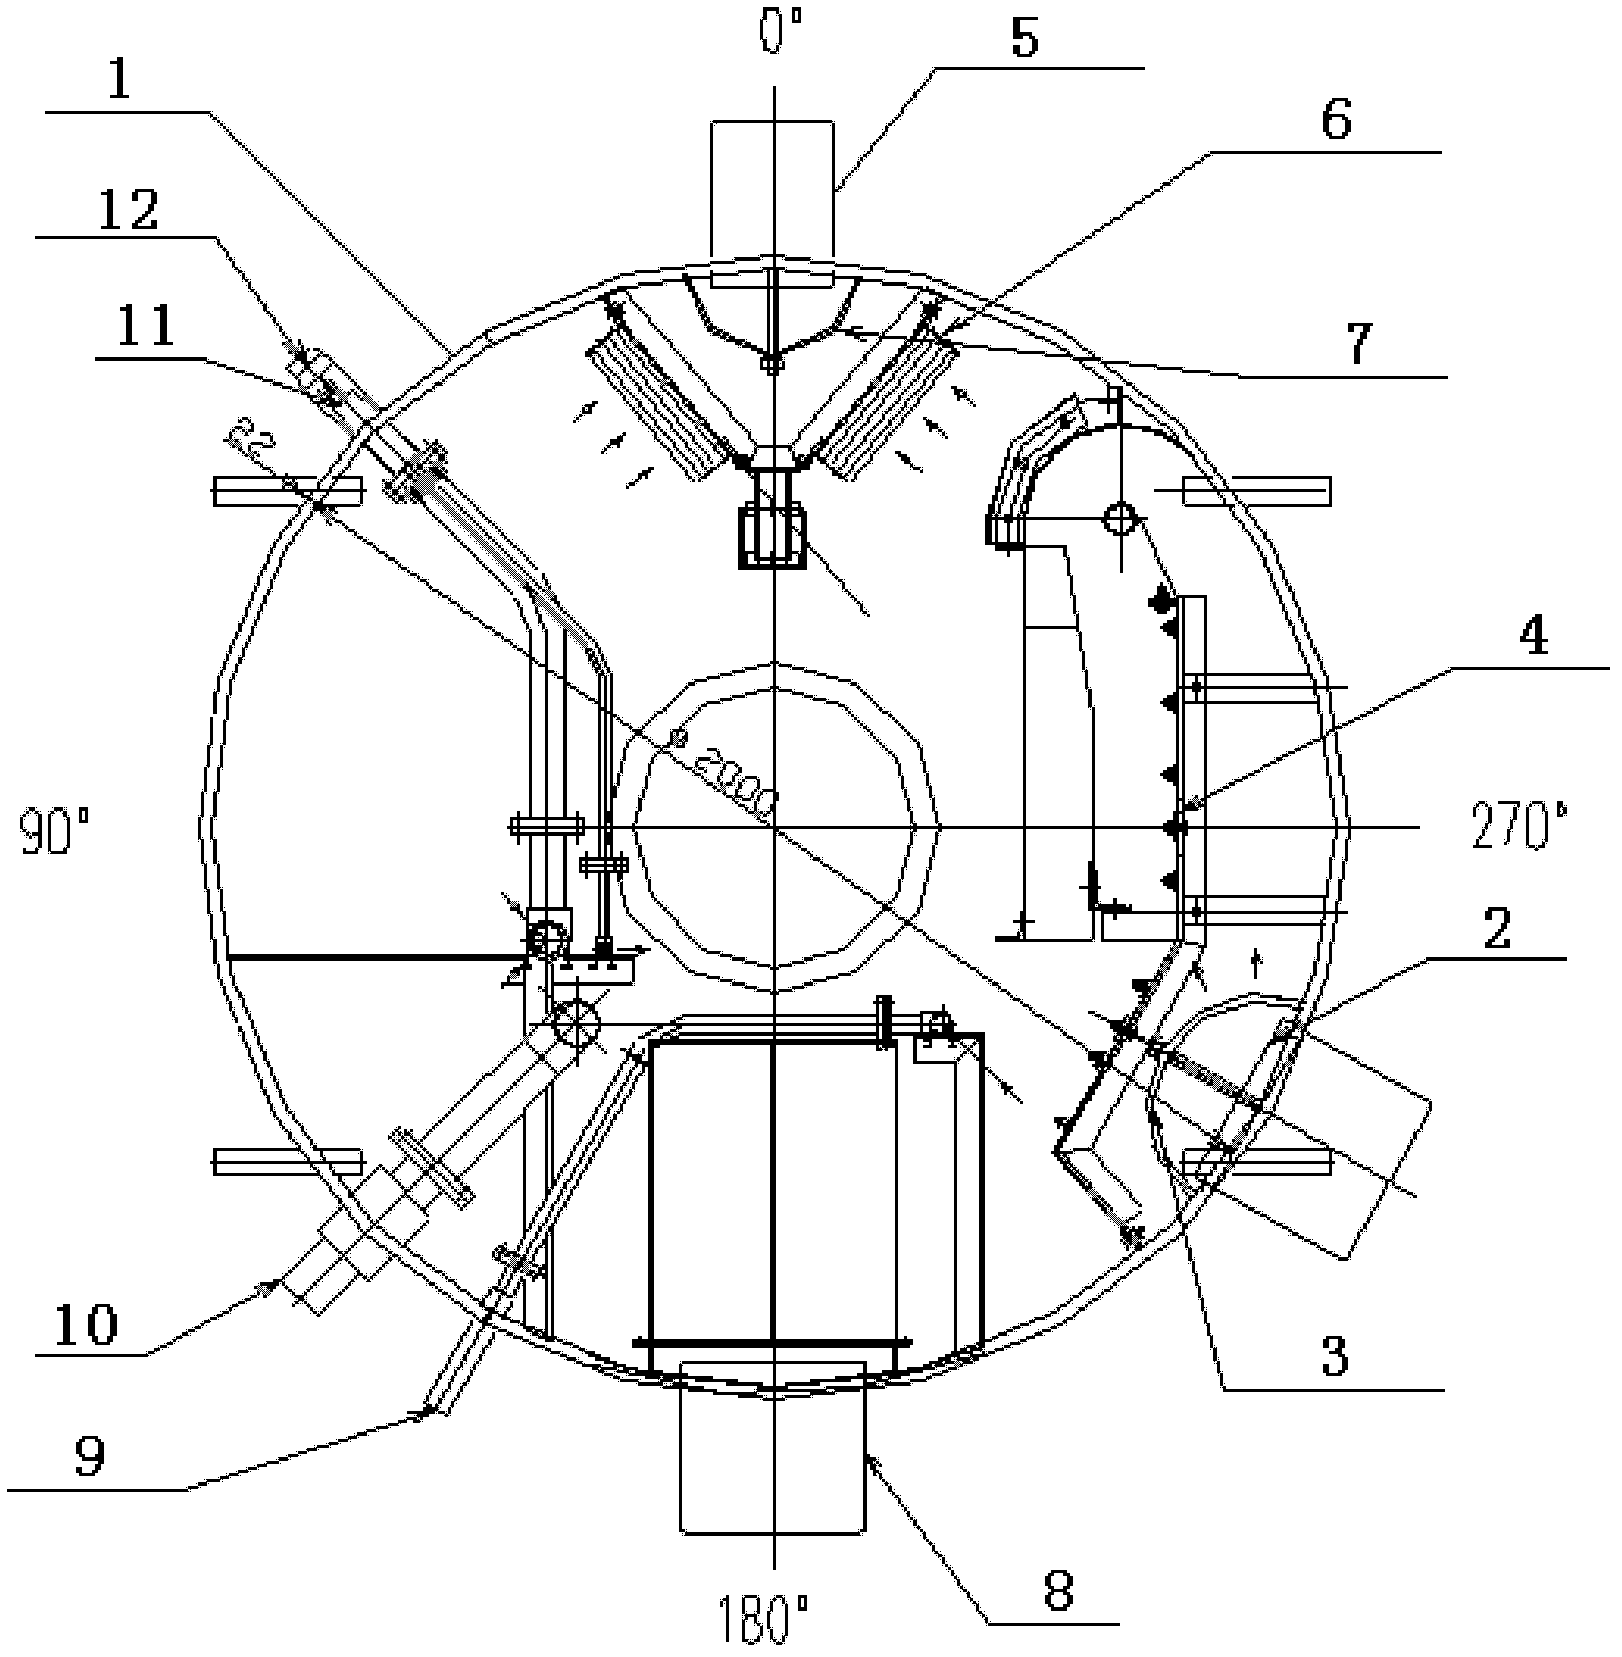 Steam and water separation device for steam dome